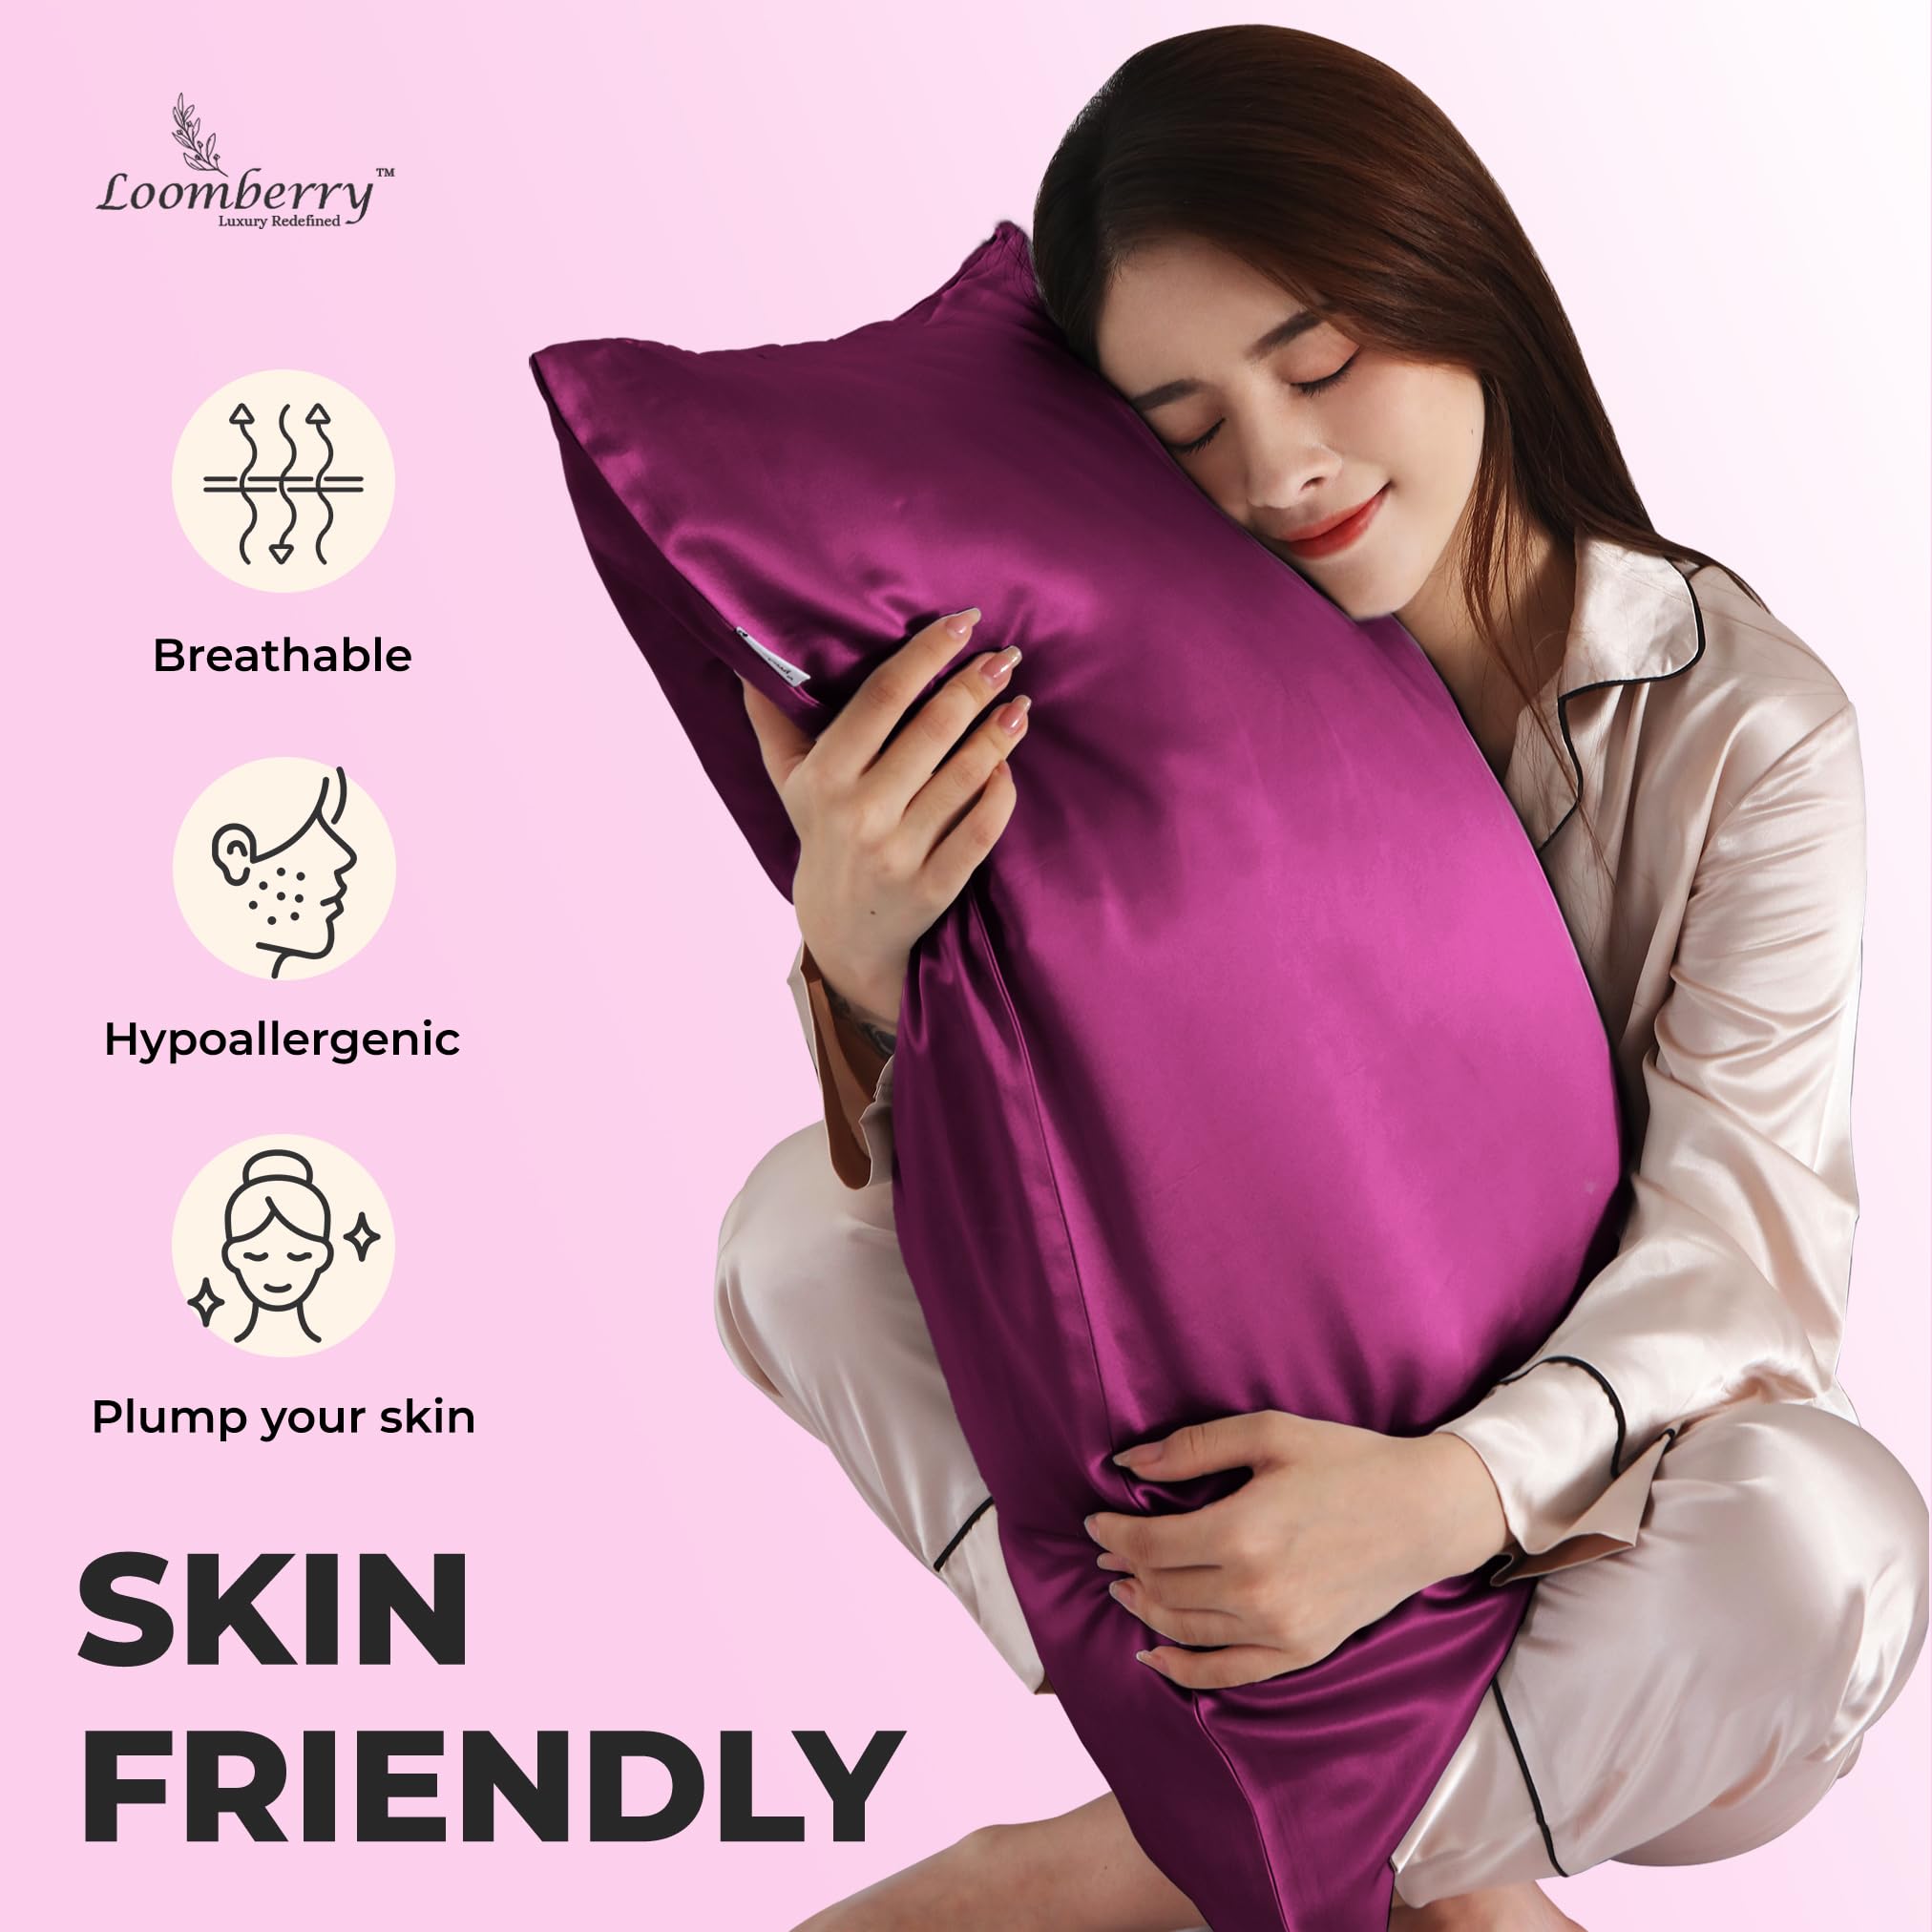 LOOMBERRY 100% Natural 22 Momme Pure Mulberry Silk Pillowcase for Hair and Skin Both Sides 22 Momme Highest Grade 6A with Hidden Zipper (Crimson Purple, Standard (50x66CM))